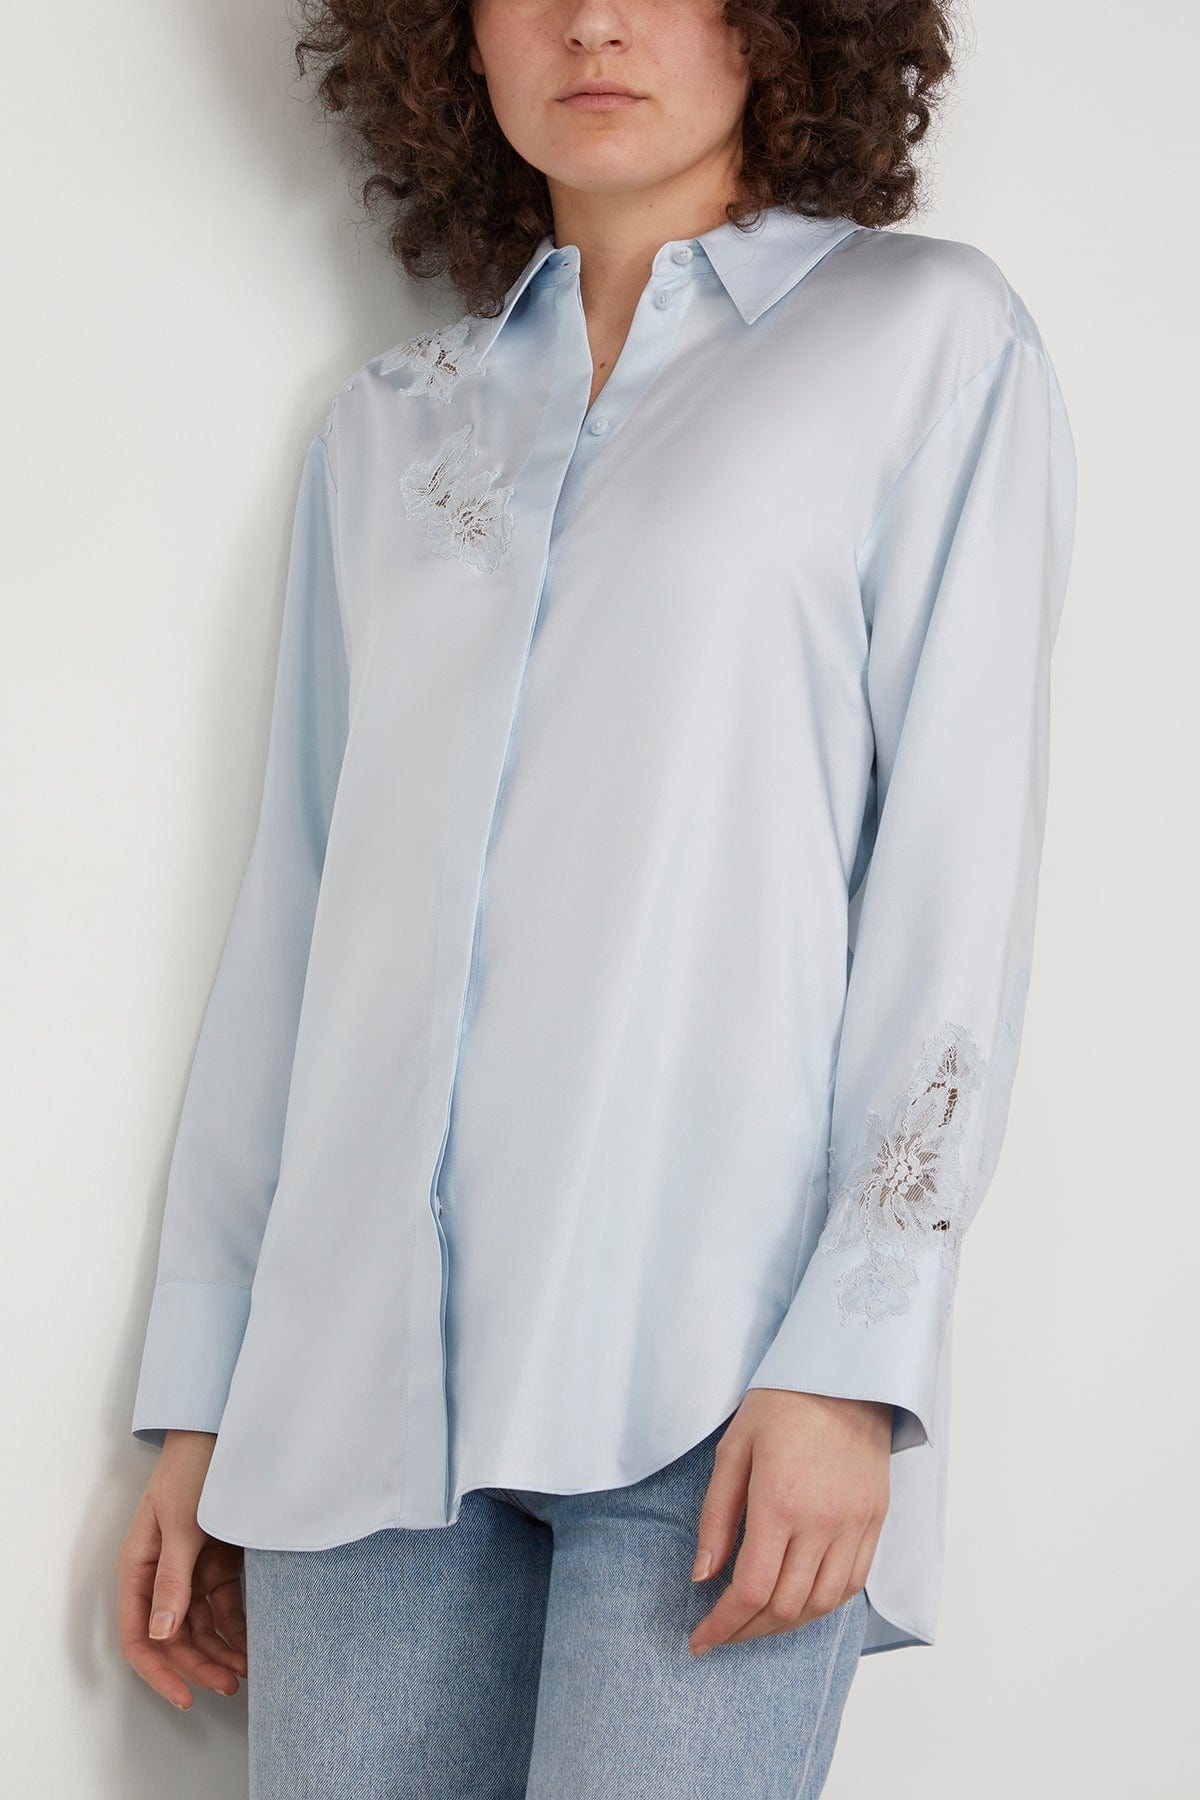 Sensual Coolness Blouse in Soft Blue - 3